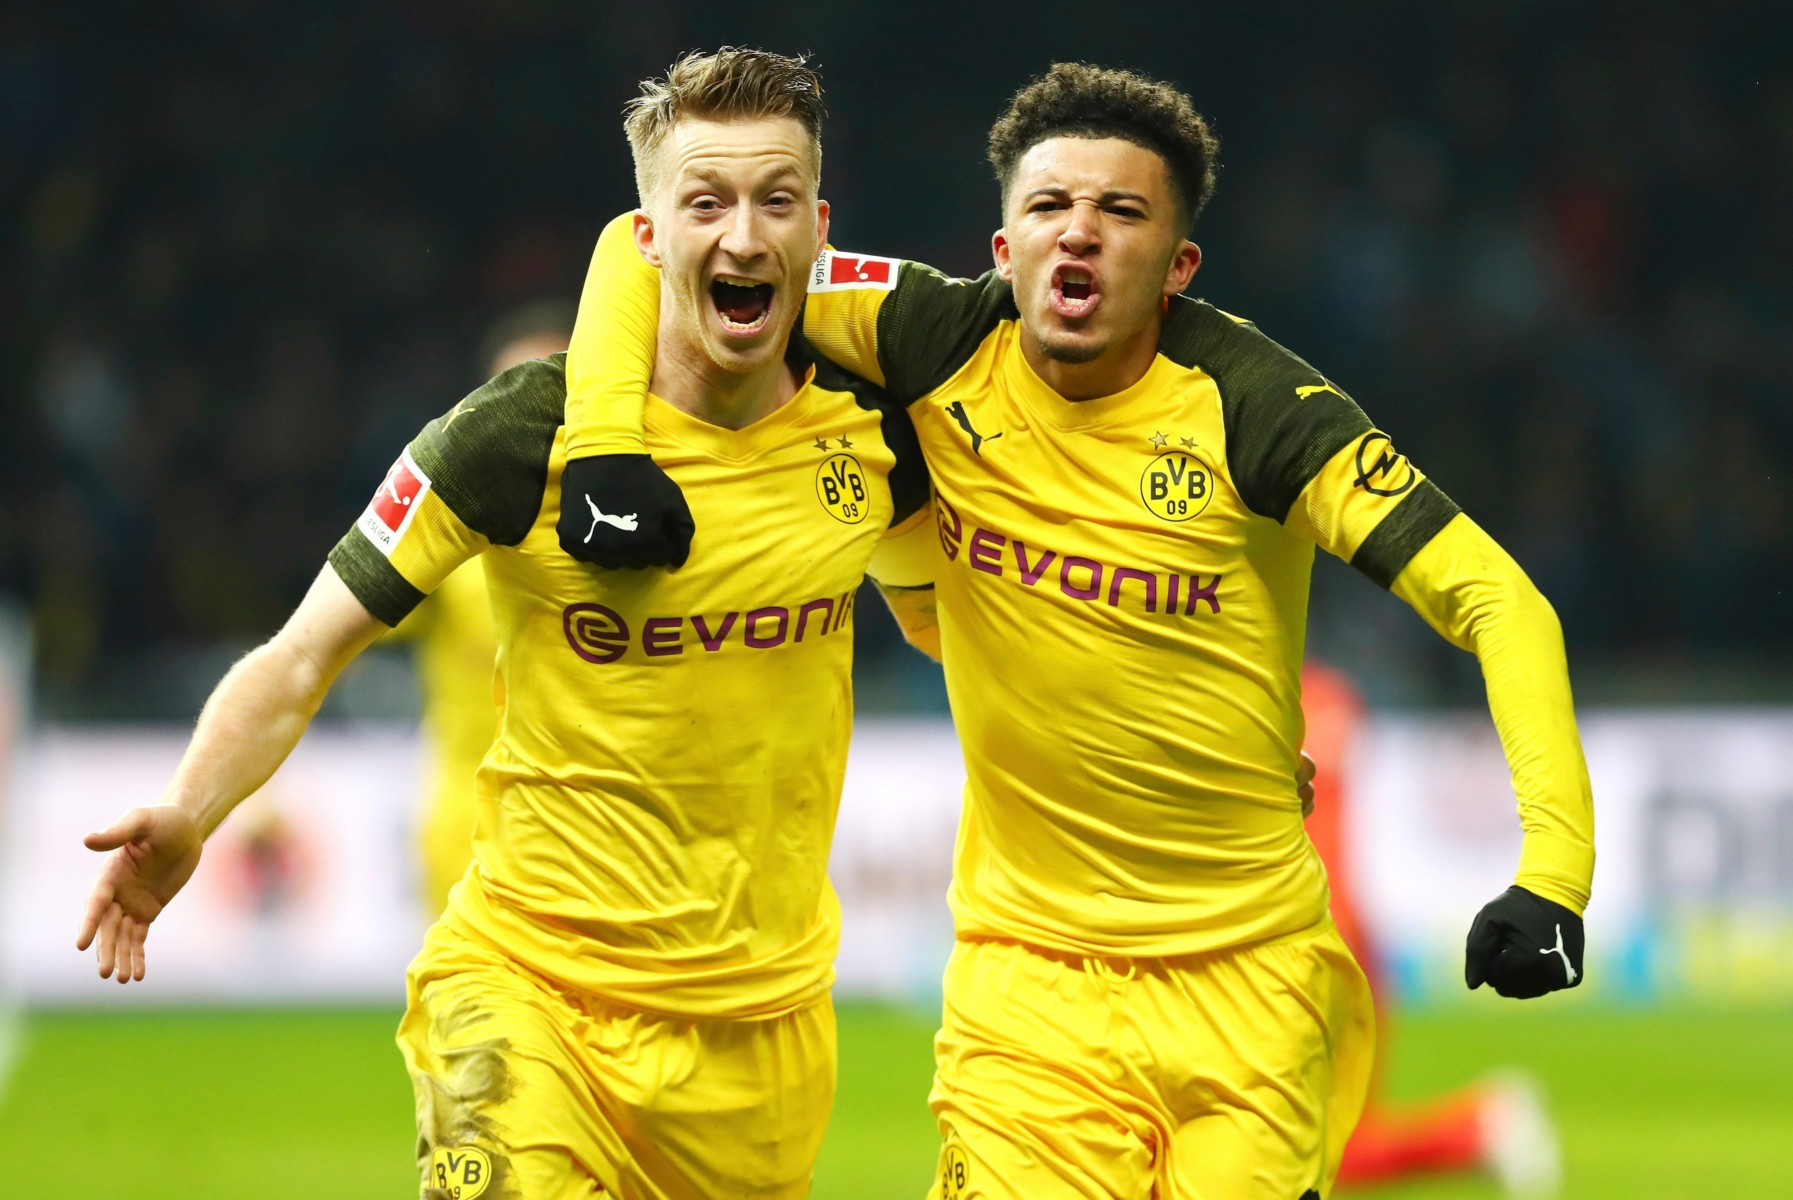 , Jadon Sancho urged to snub Man Utd transfer and stay at Dortmund for two more years by team-mate Marco Reus